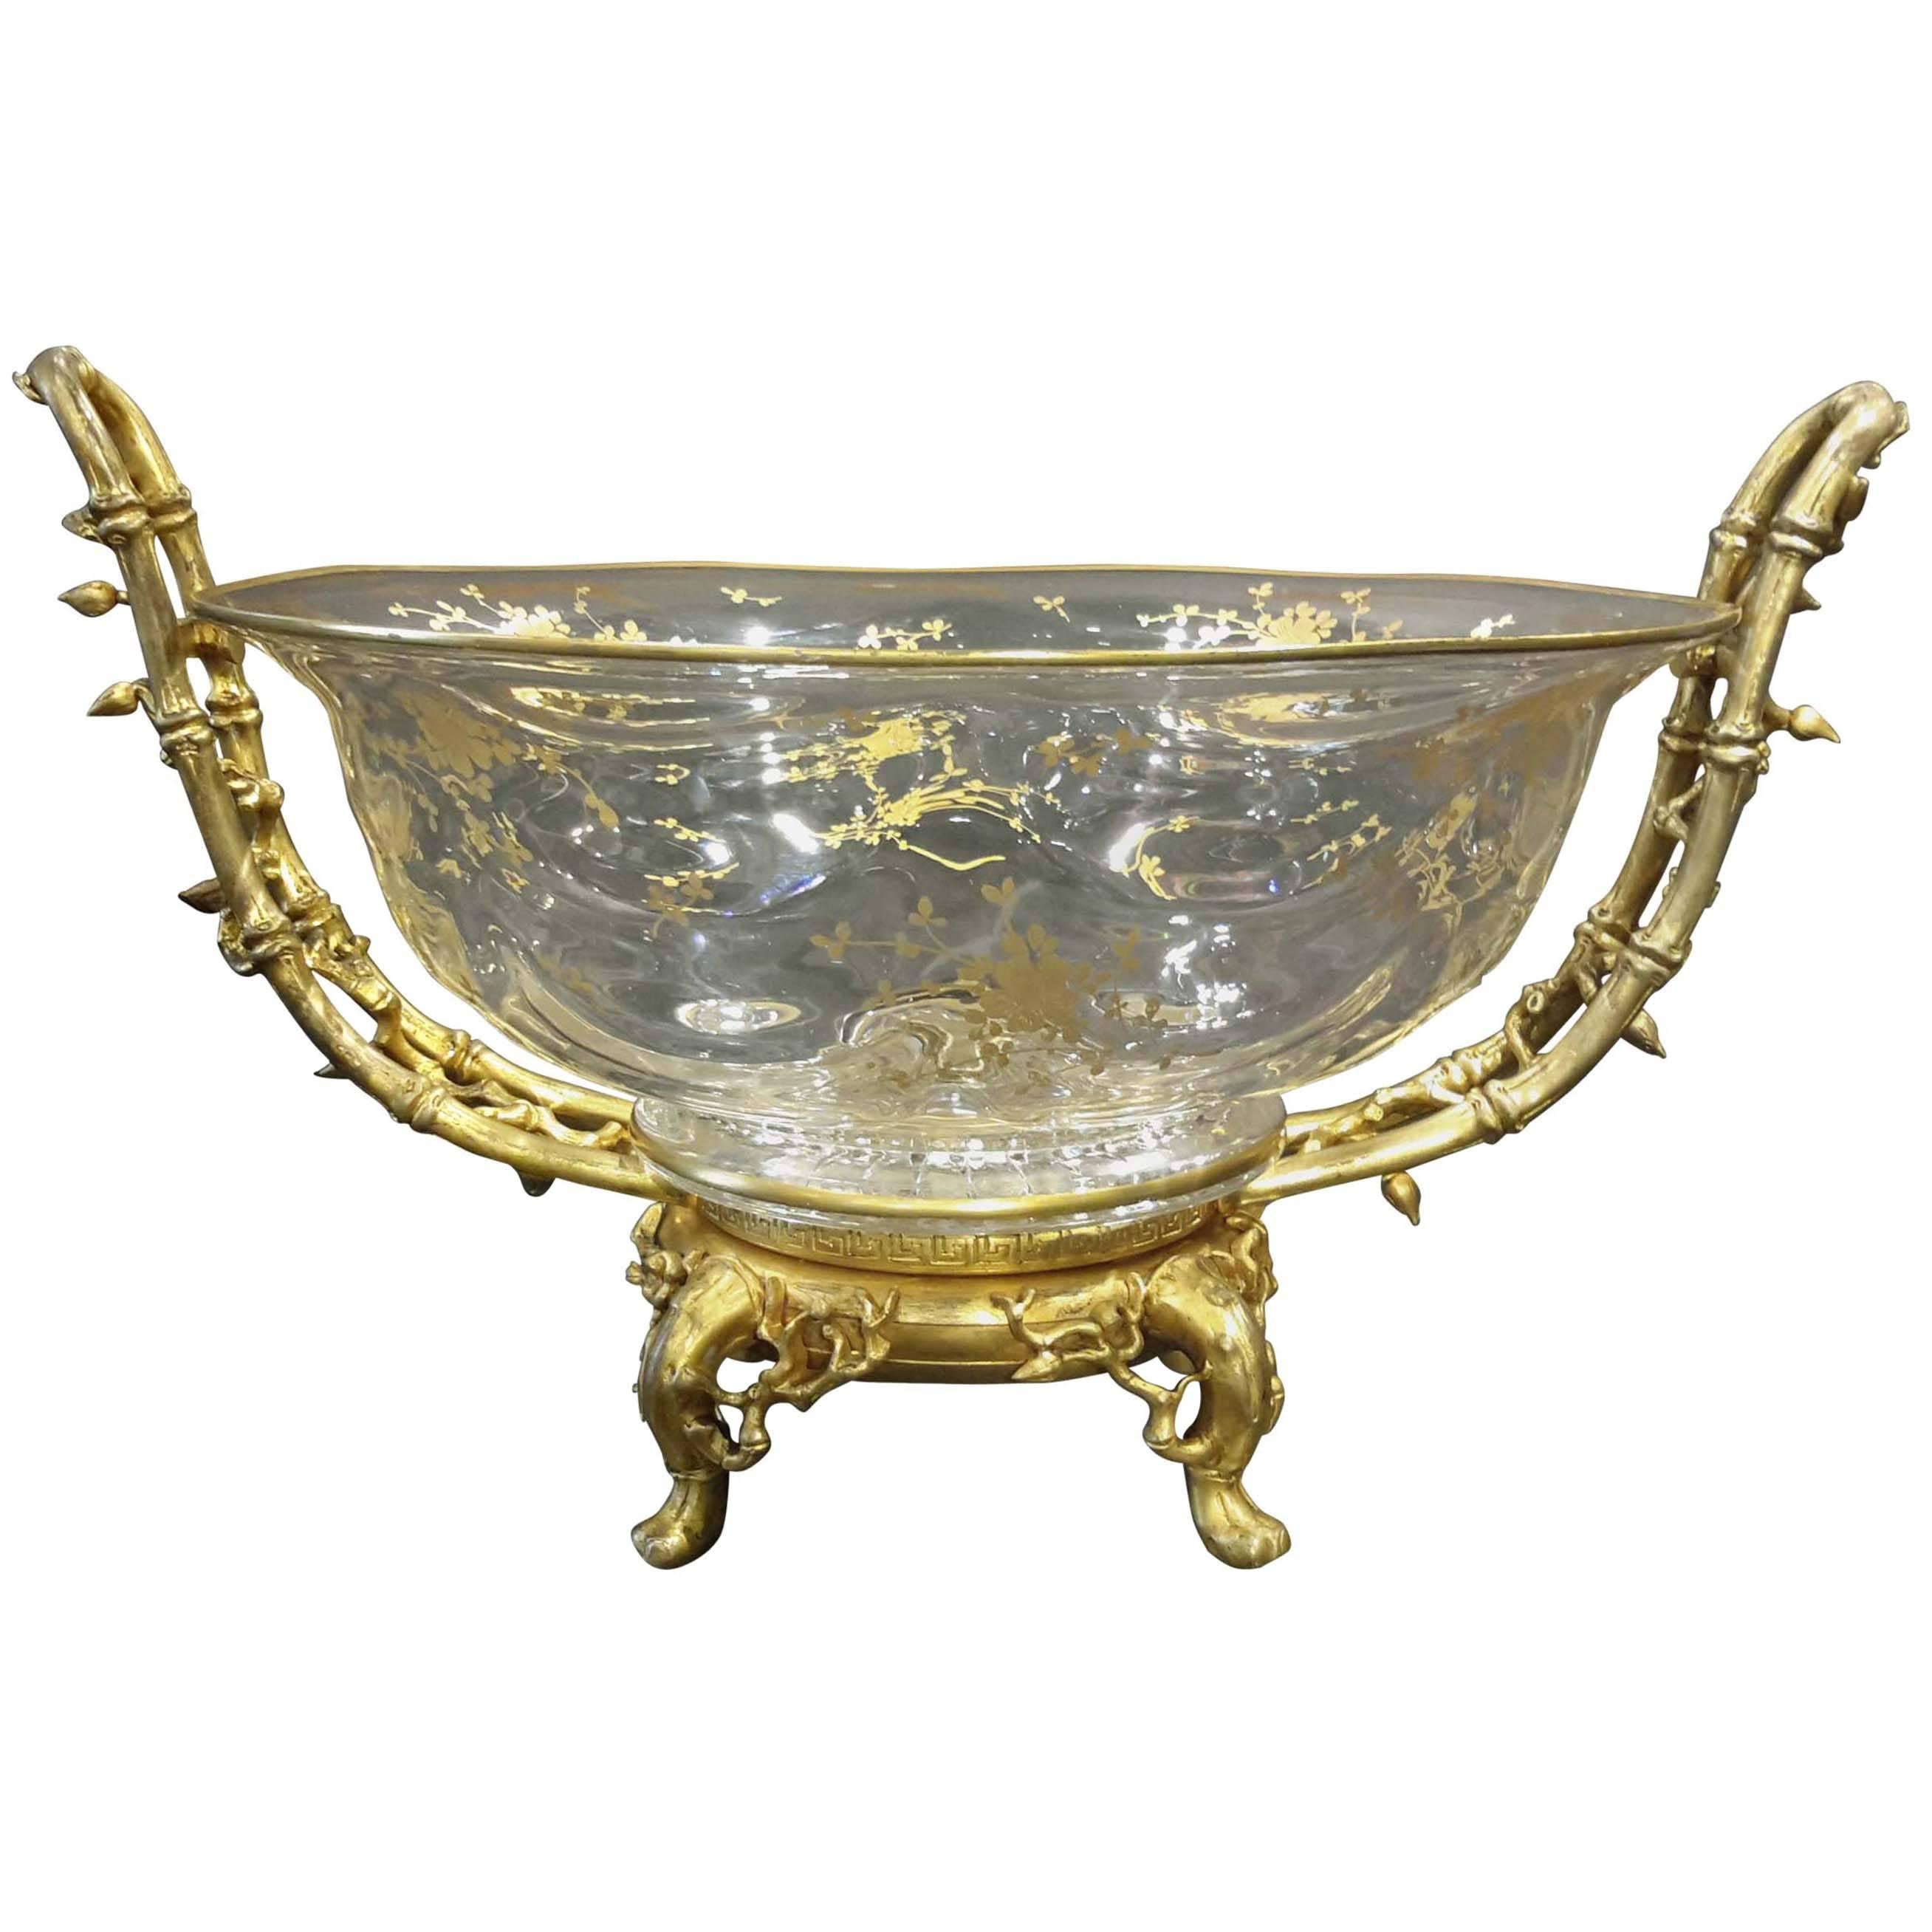 Chinoiserie Gilt Bronze and Crystal Centerpiece, French, 19th Century